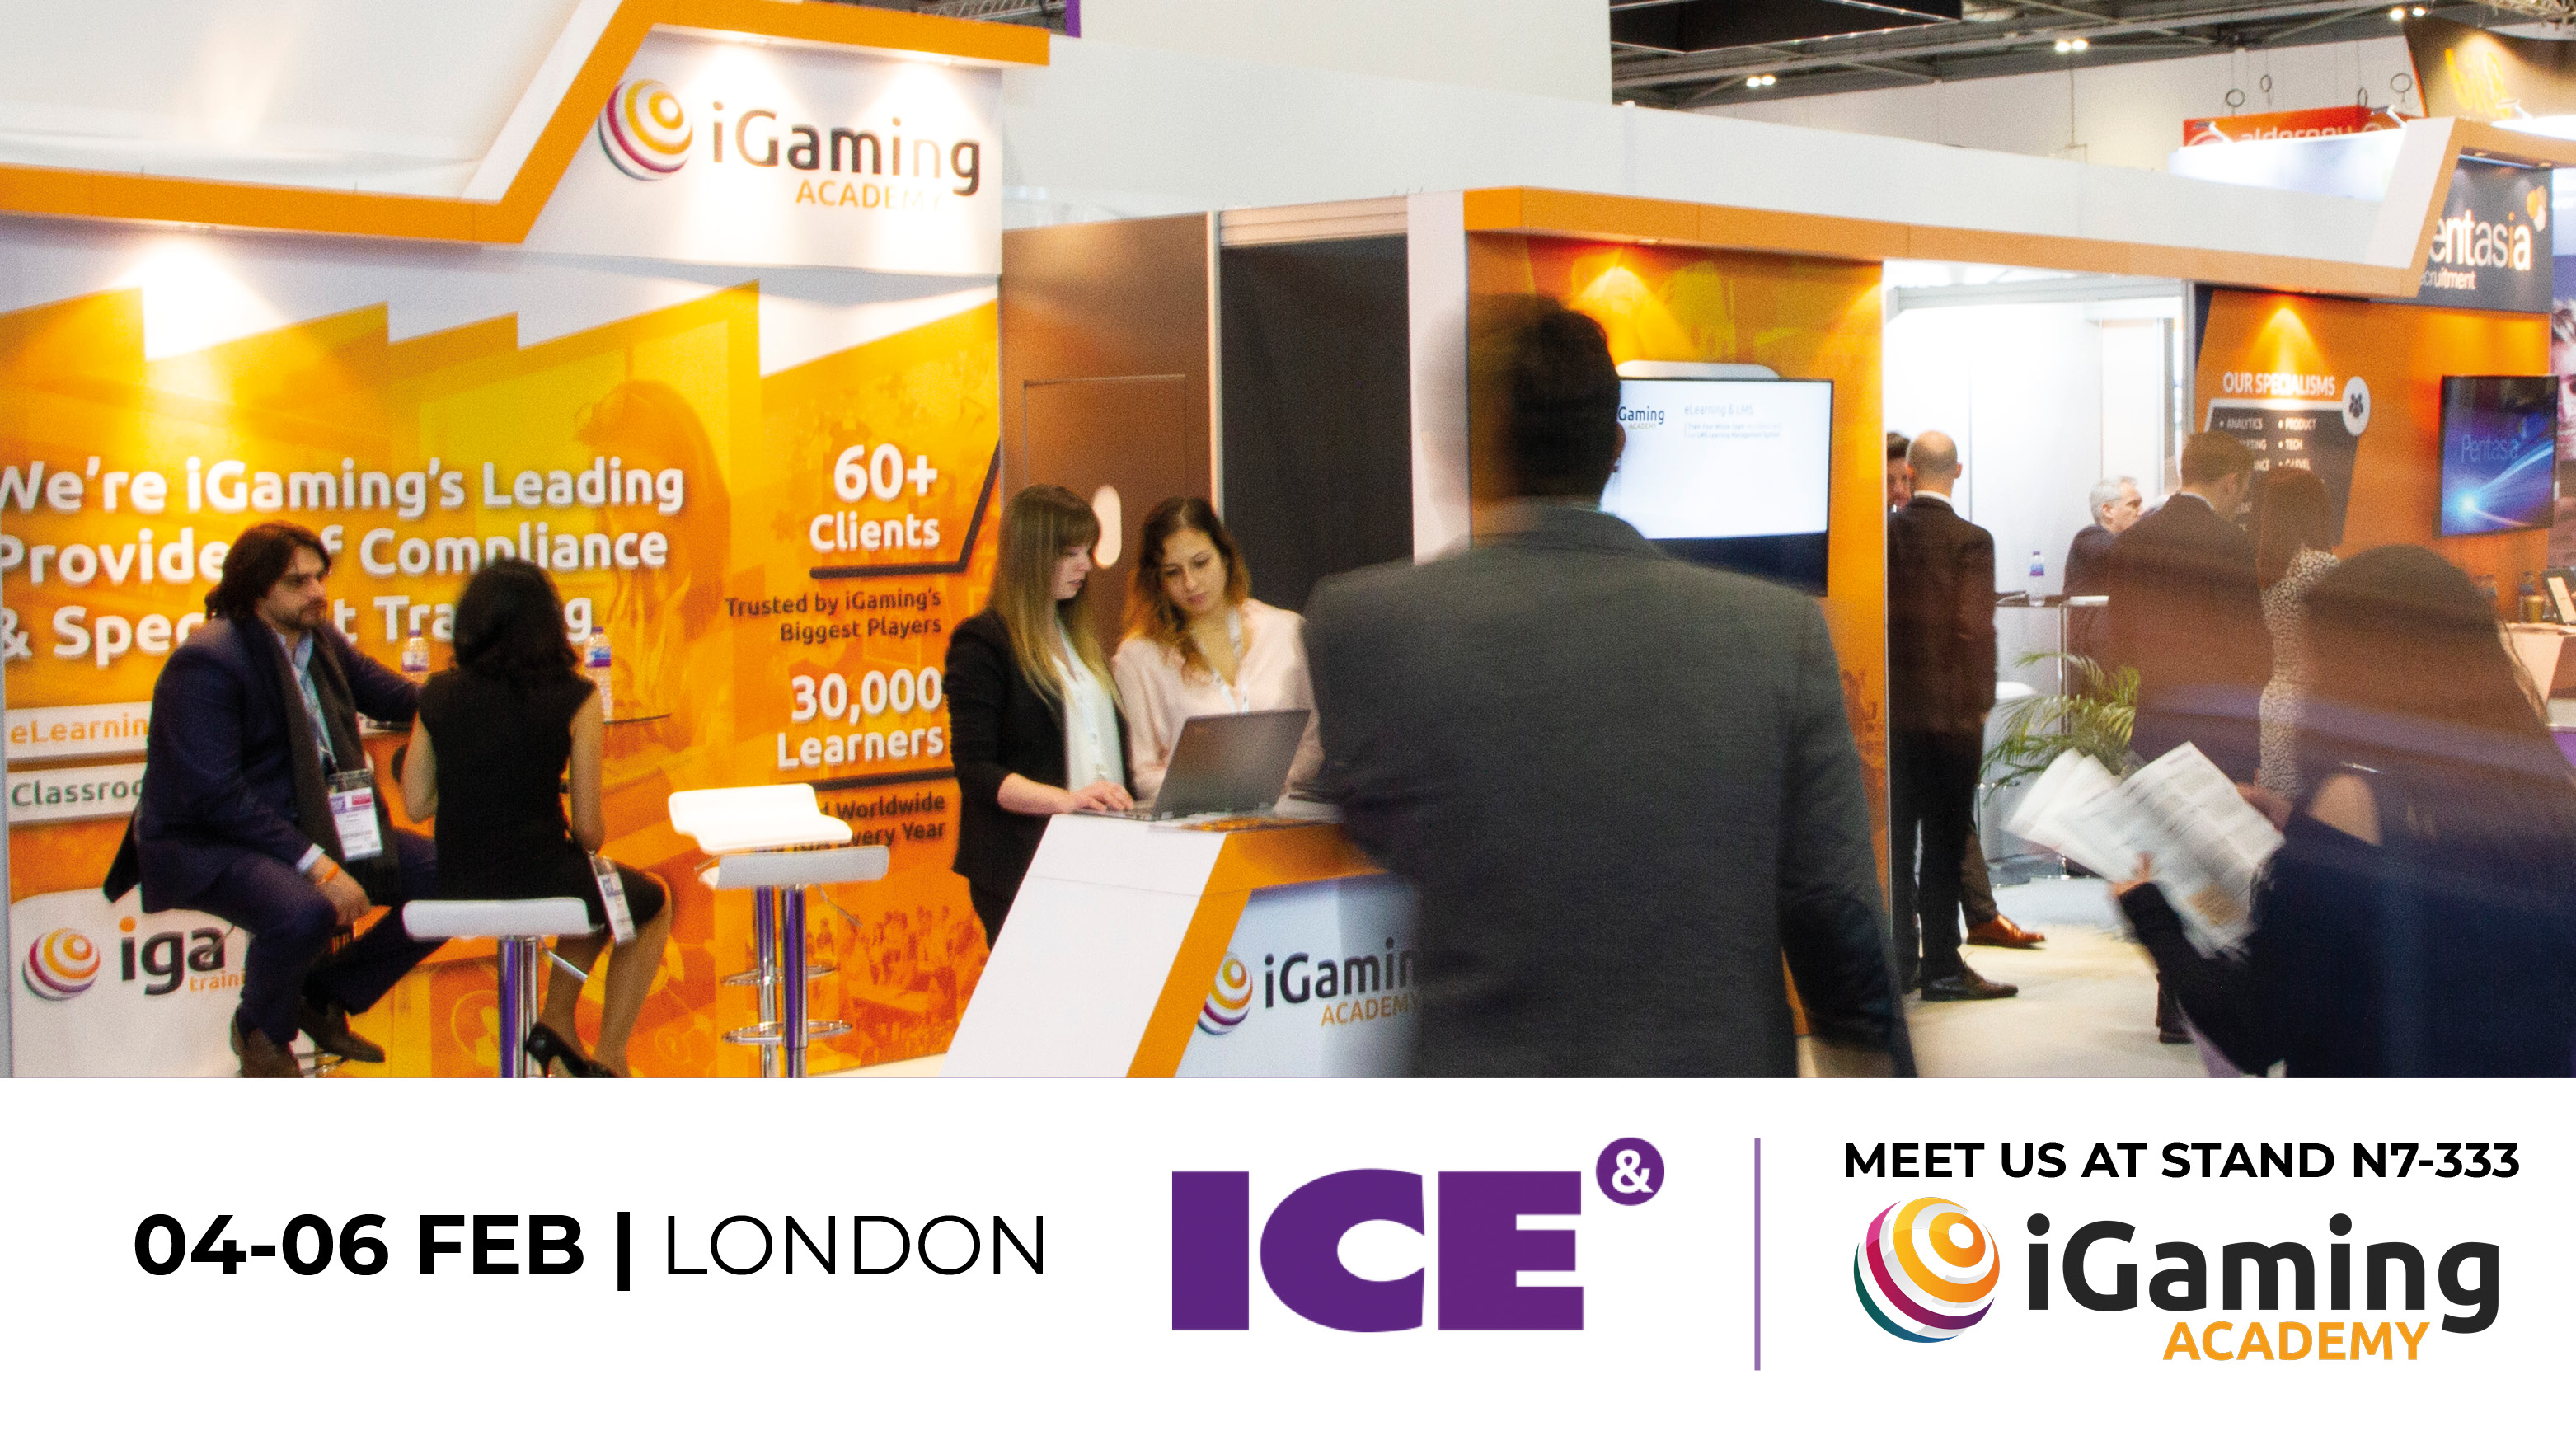 iGaming Academy at ICE London 2020: The World’s Biggest Gaming Innovation Showcase